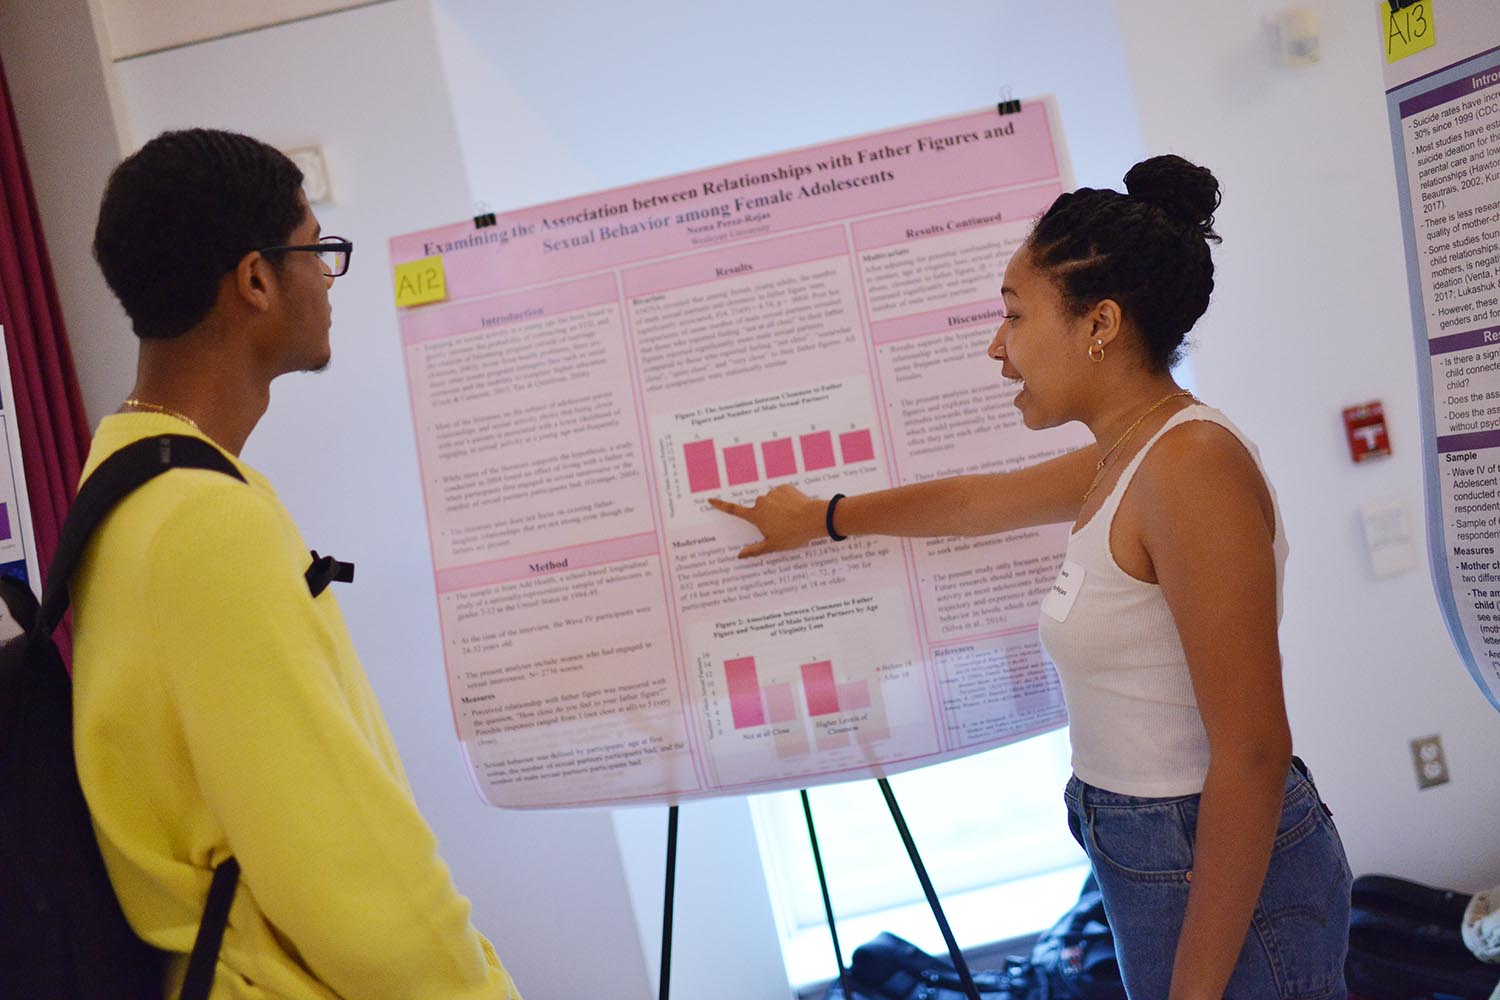 Neena Perez-Rojas '21 discussed her study, "Examining the Association between Relationships with Father Figures and Sexual Behavior among Adolescents." 